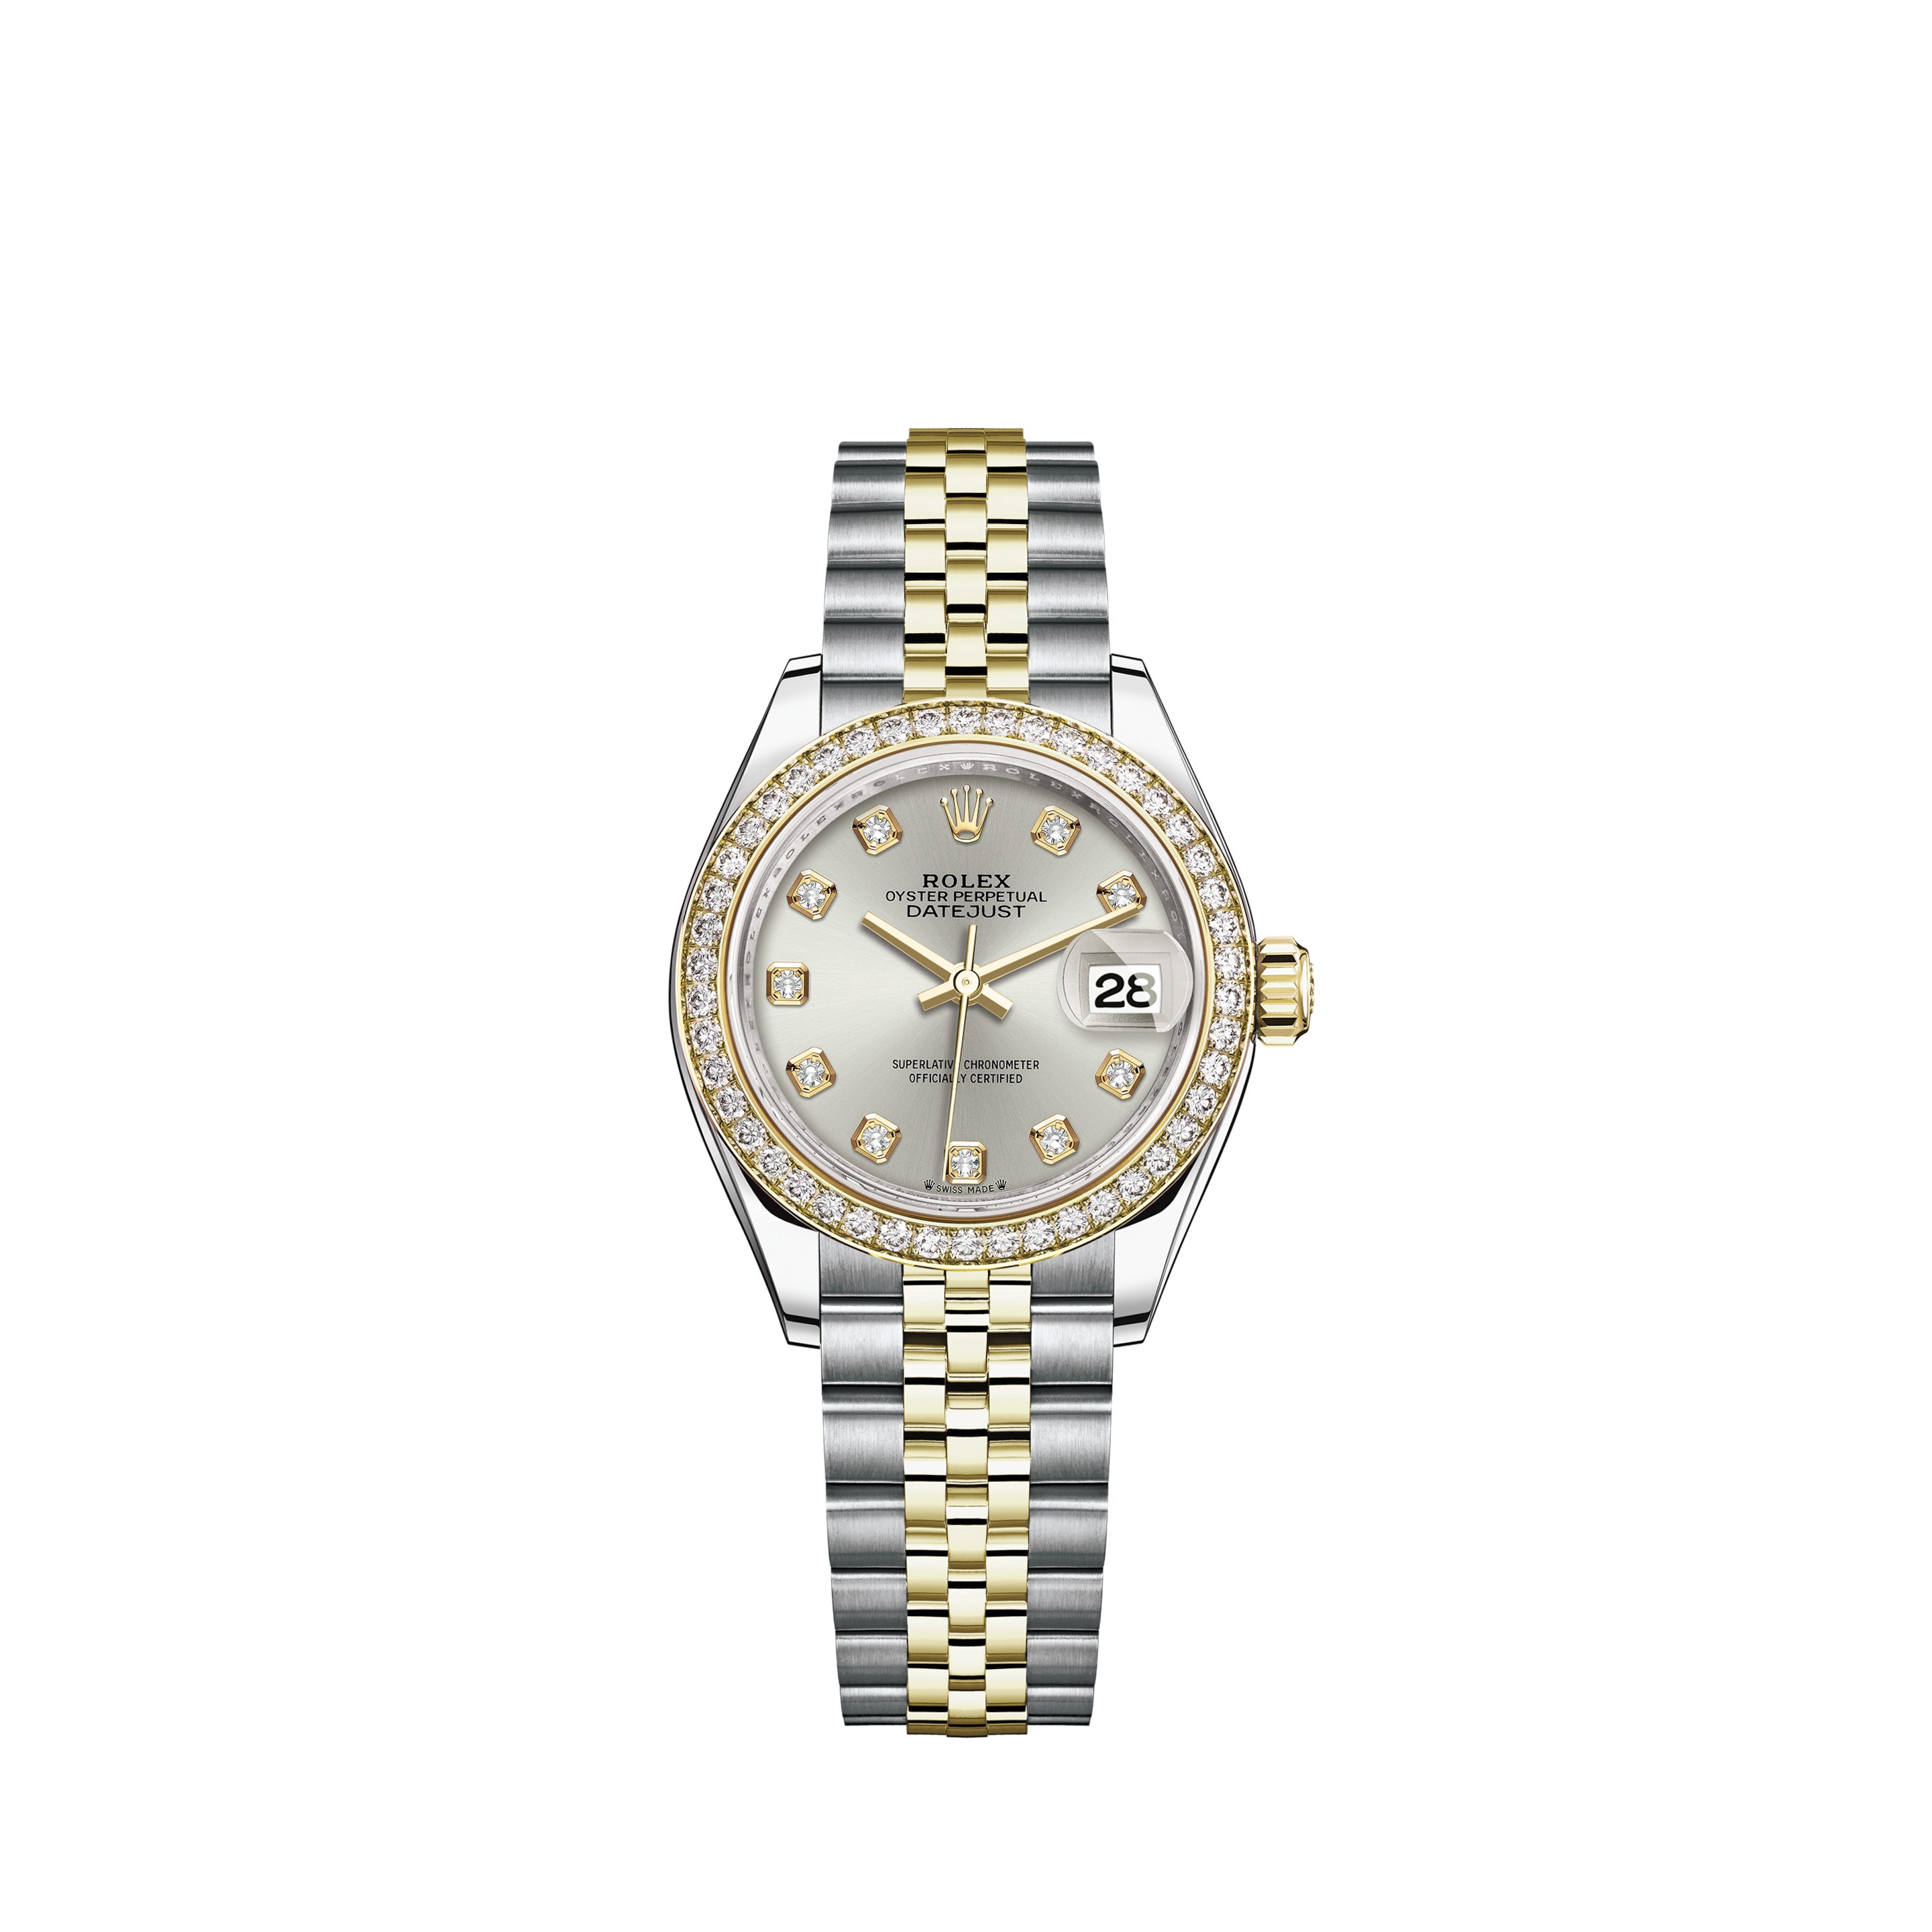 Rolex W/Open Papers Rolex Datejust II 41 mm Steel Automatic Silver Dial Watch 116300Rolex W/Papers Date 34 mm Automatic Gold Bezel Oyster Watch 1505 Circa 1979